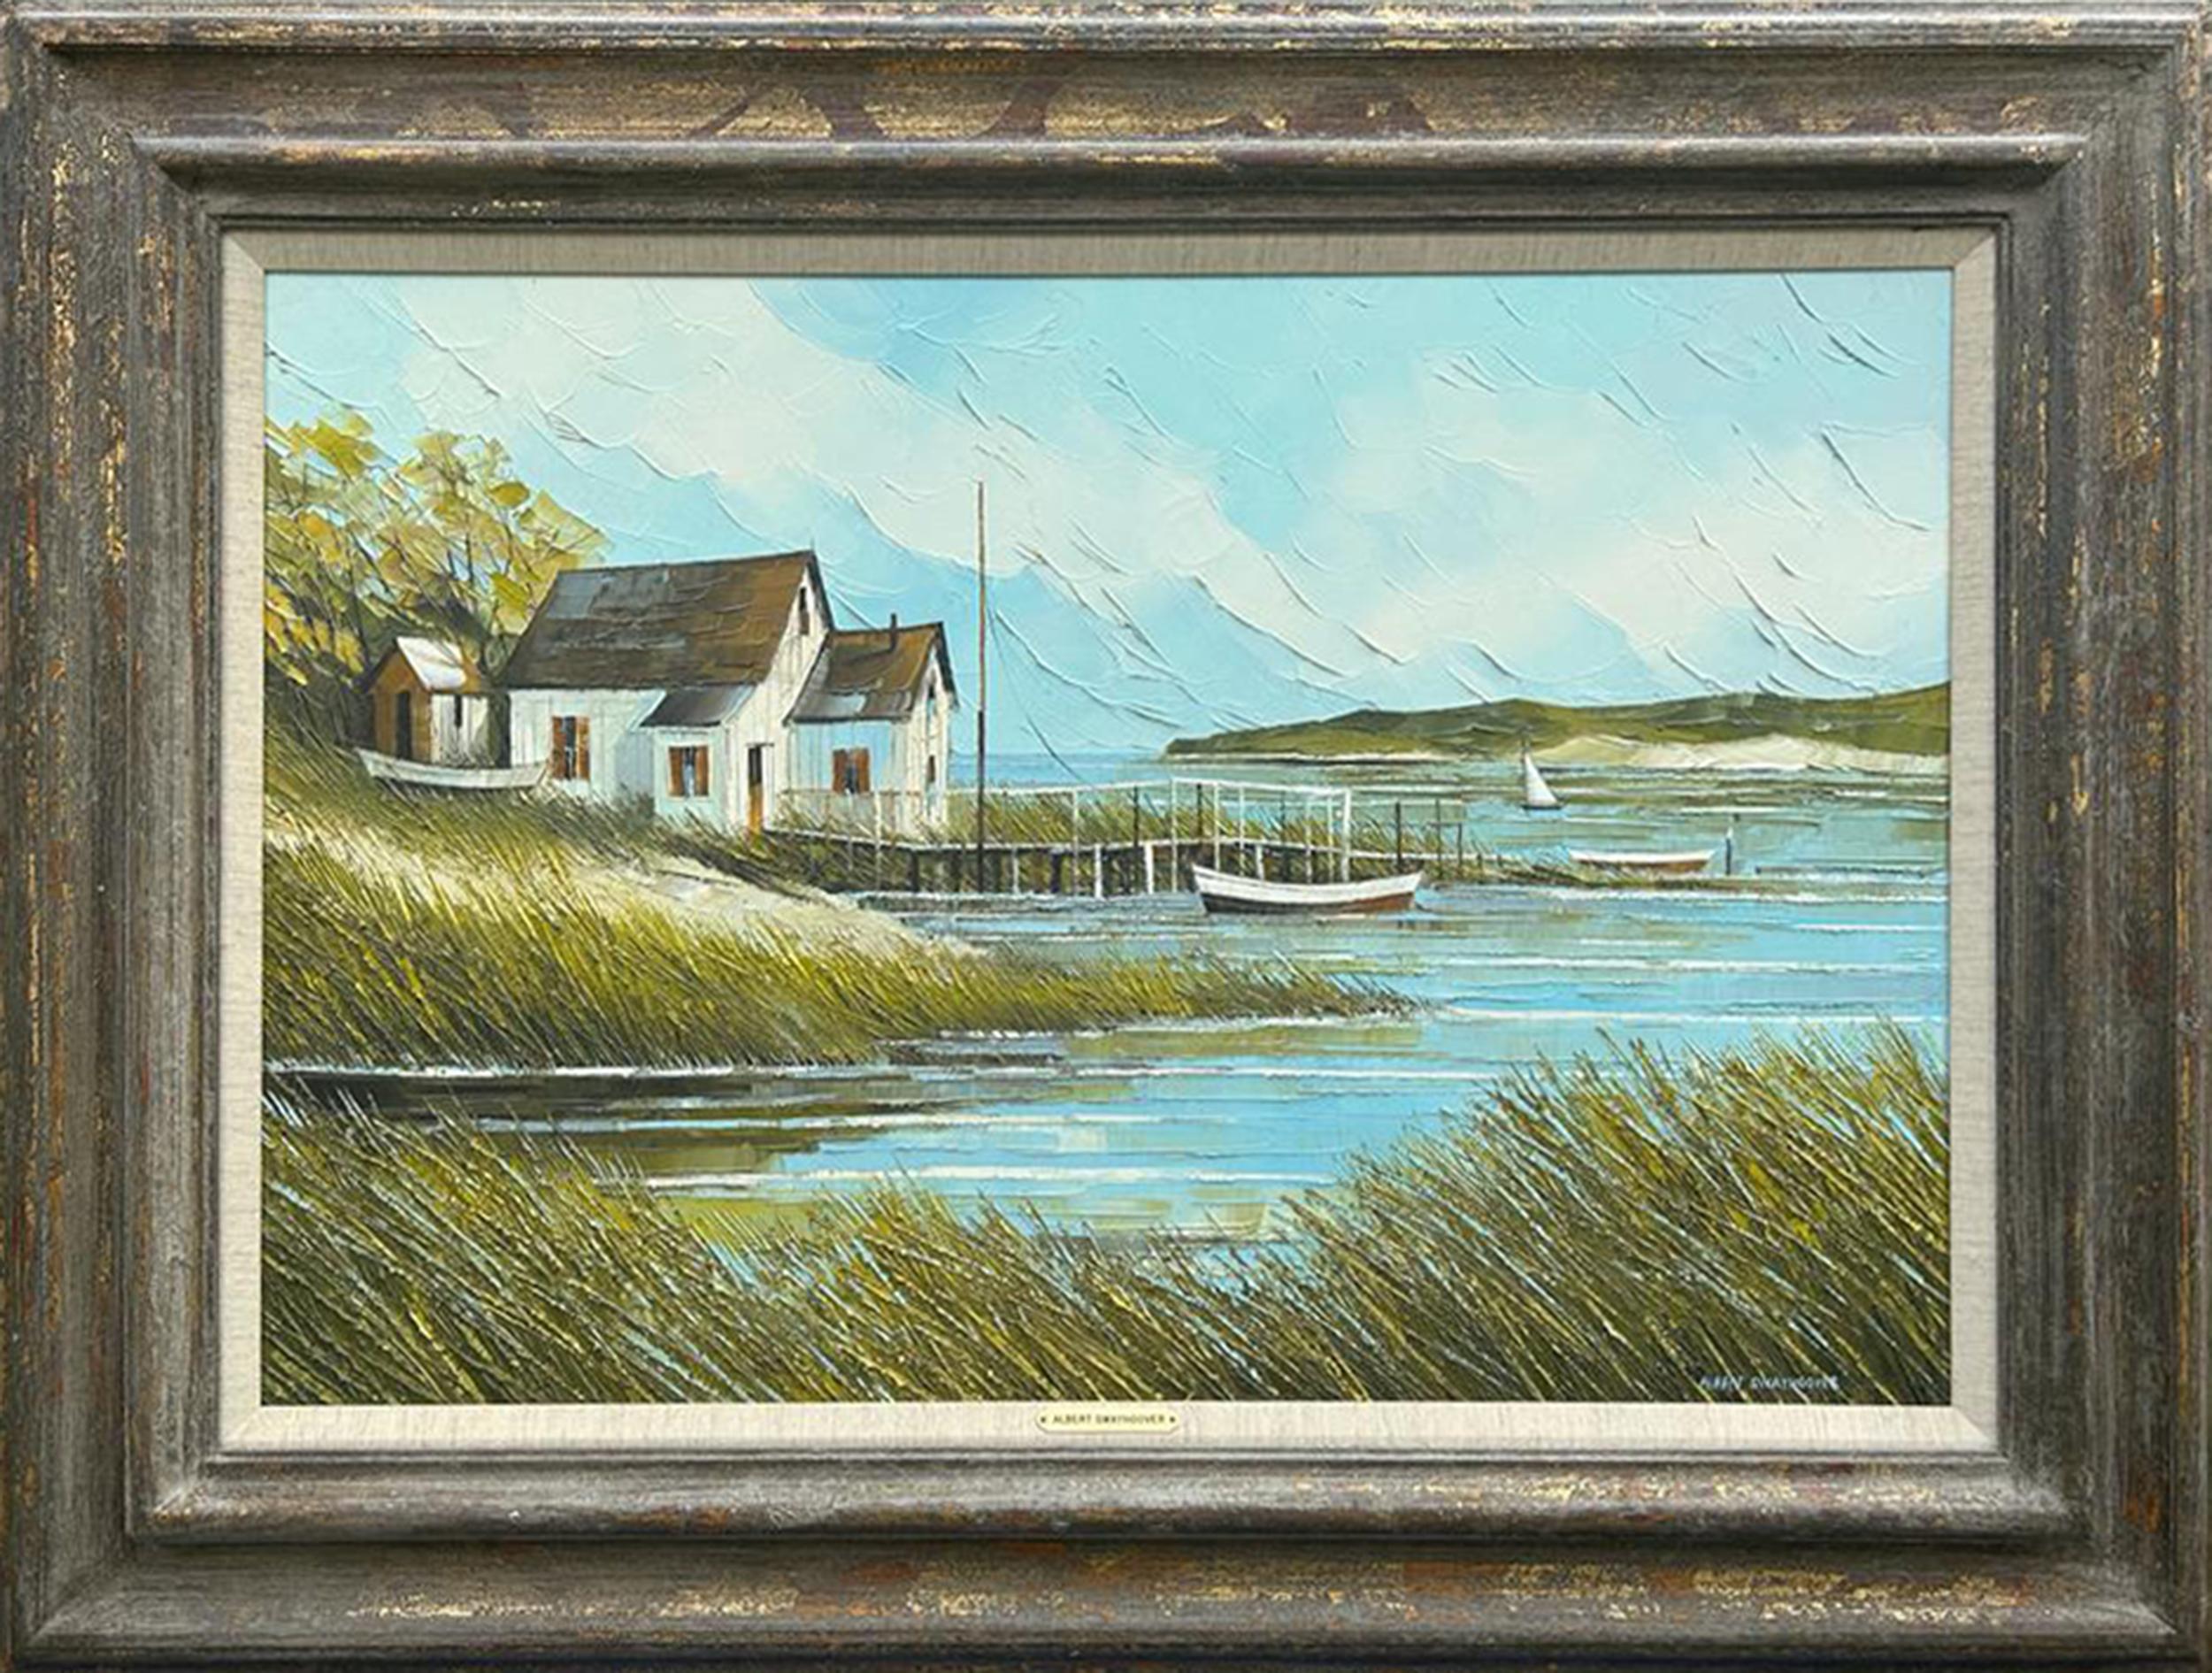 A breezy coastal scene of an ocean inlet flanked by tall green grasses. Up in the dunes is a white house serviced by a pier and a few sailboats can be seen bobbing in the water.

Coastal House
Albert Swayhoover, American (1931–2017)
Oil on Canvas,